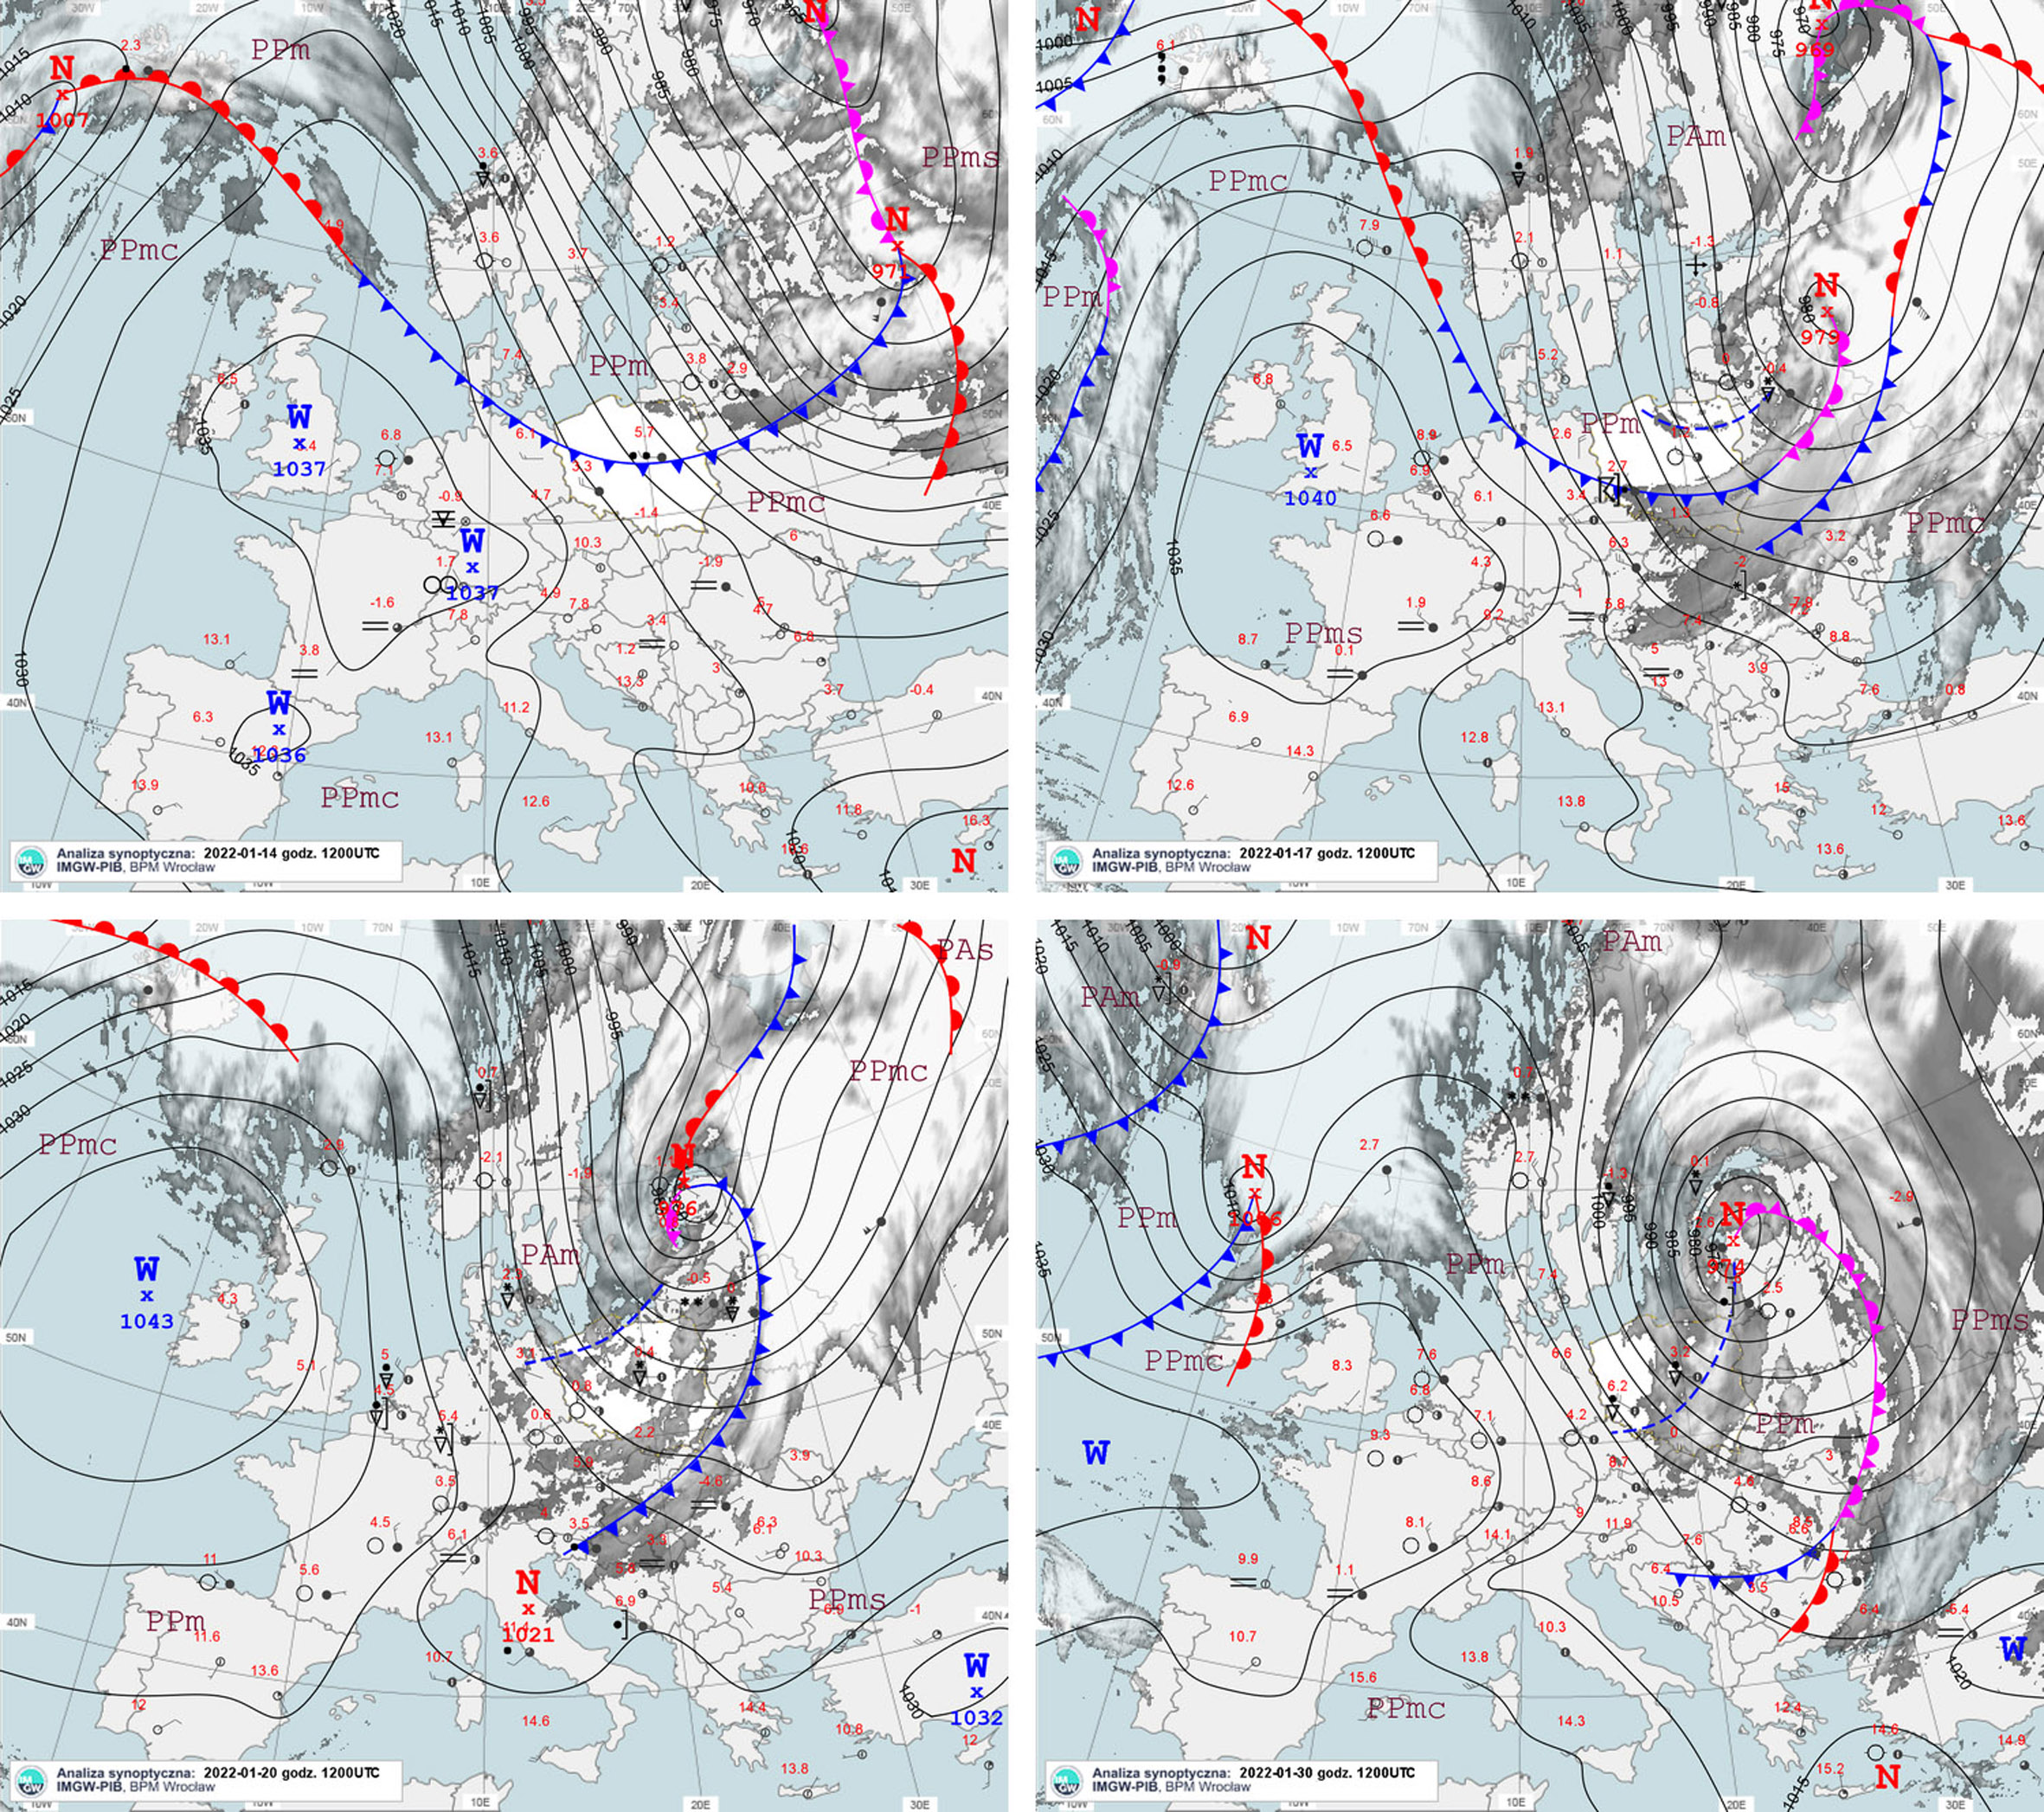 The baric situation at 12:00 UTC on January 14, 17, 20, and 30. In all of the images, you can see a similar pattern: a strong high over Western Europe and deep low over Russia, a large pressure difference over Poland and dynamically moving, active front lines, followed by a rapid flow of polar or arctic maritime air. What distinguishes January 30, 2022, is the huge pressure difference over Poland, which at times exceeded 30 hPa. A secondary atmospheric front with the flowing arctic maritime air behind it once again created favorable conditions for thunderstorms. However, the main danger that day was a strong wind.